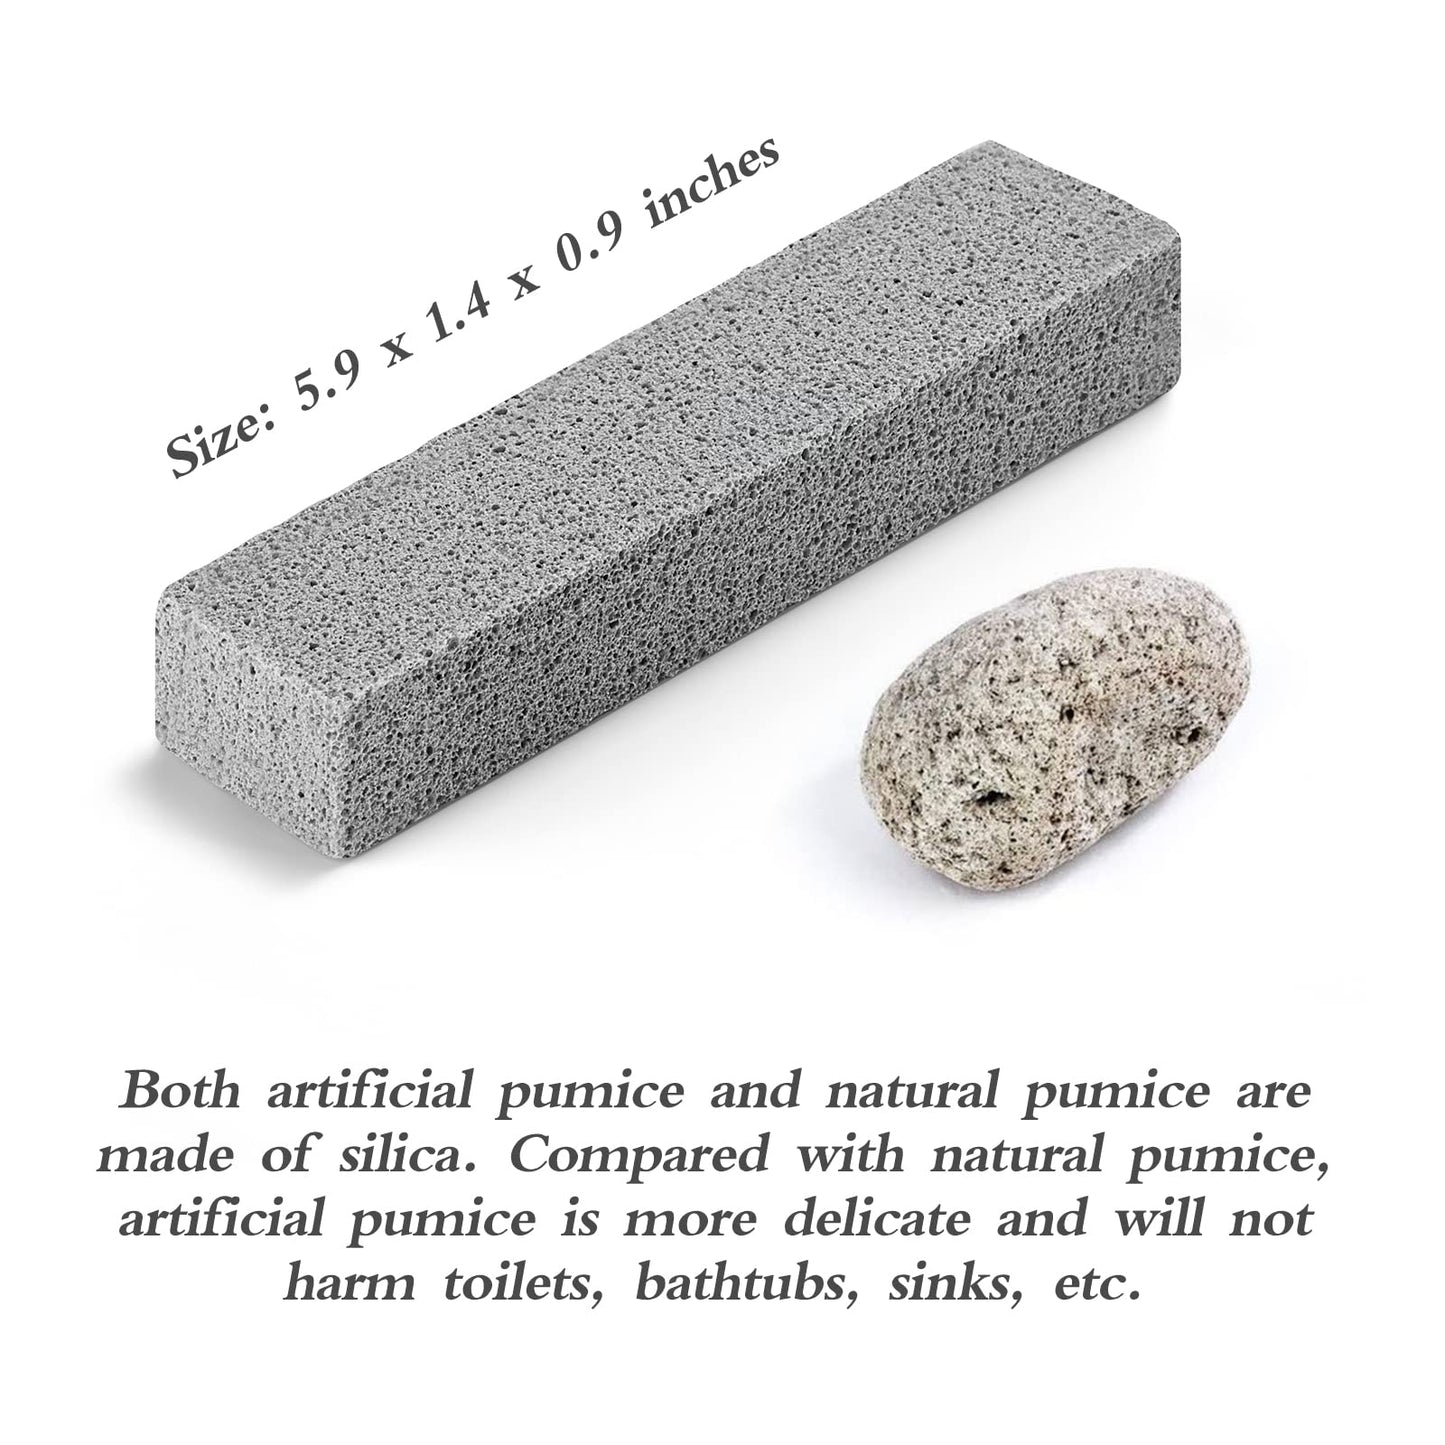 Lenicany 6Pack Pumice Stone for Toilet Cleaning Bowl Stick,Powerfully Cleans Hard Water Rings, Calcium Buildup & Stains, Suitable for Cleaning Toilet, Bathtubs, Kitchen Sink, Grill